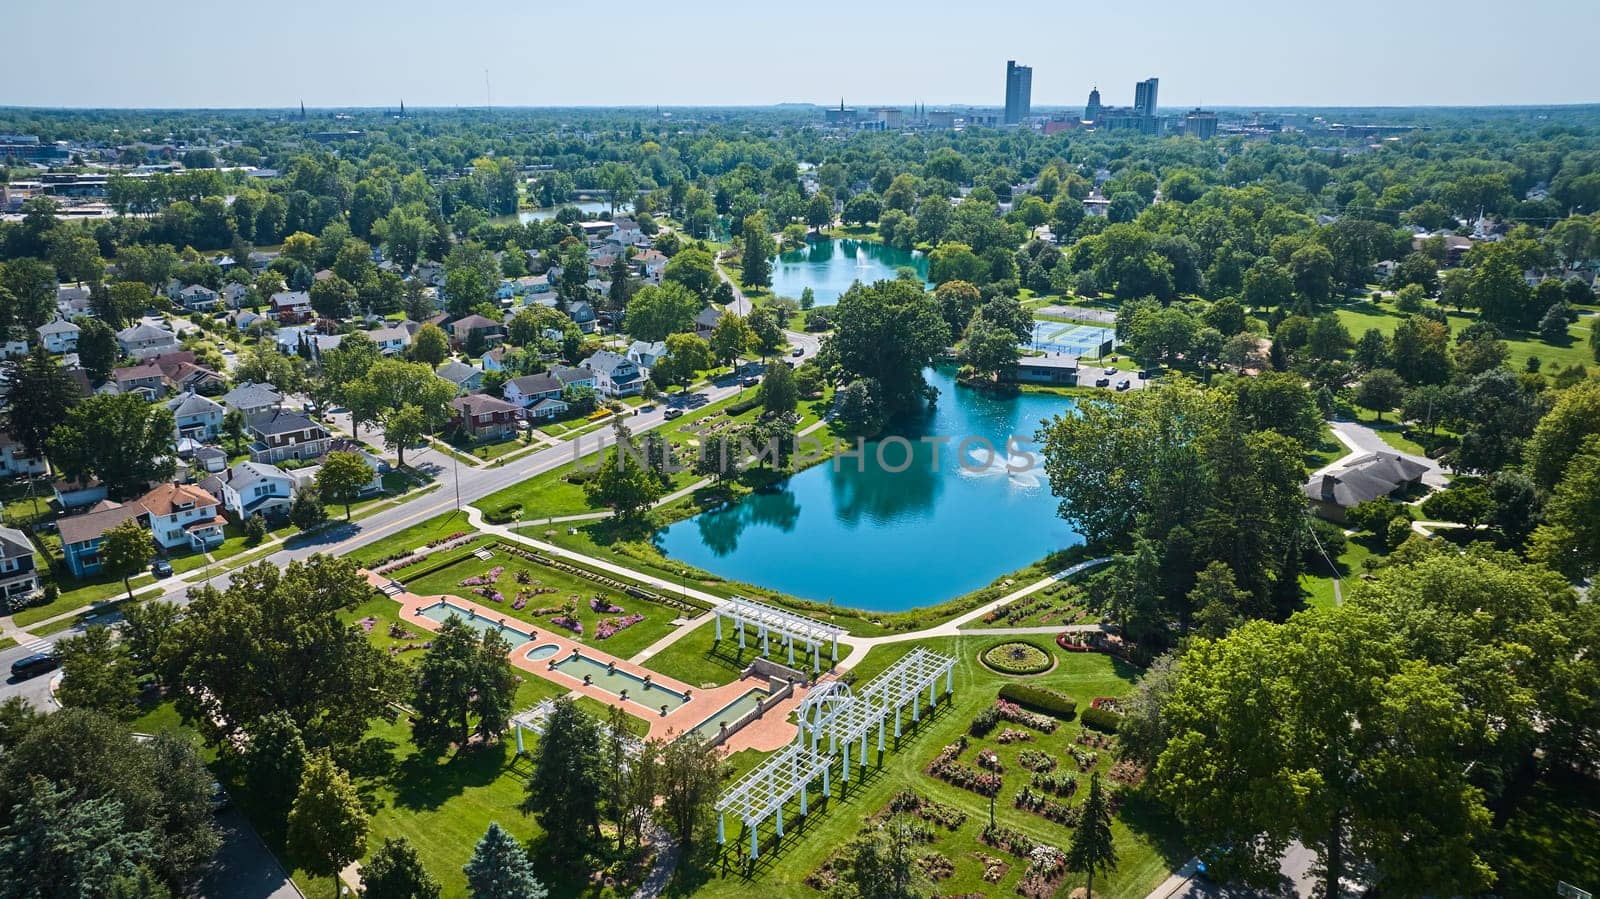 Image of Aerial Lakeside Park gardens and fountains with distant downtown Fort Wayne